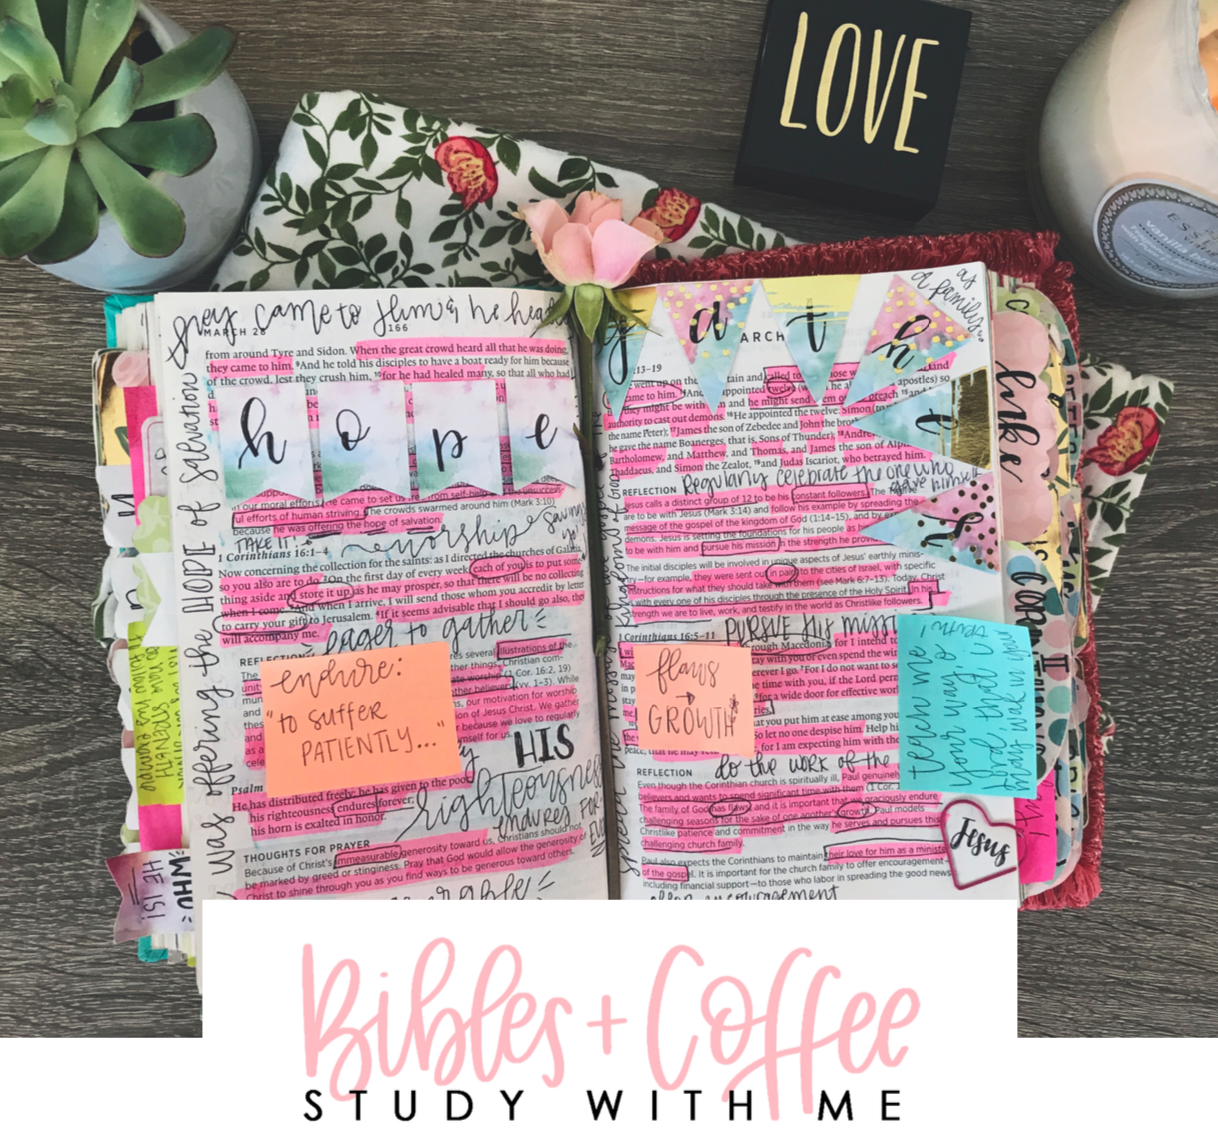 Study With Me Guide (A Guide to Reading the Bible) - Bibles and Coffee